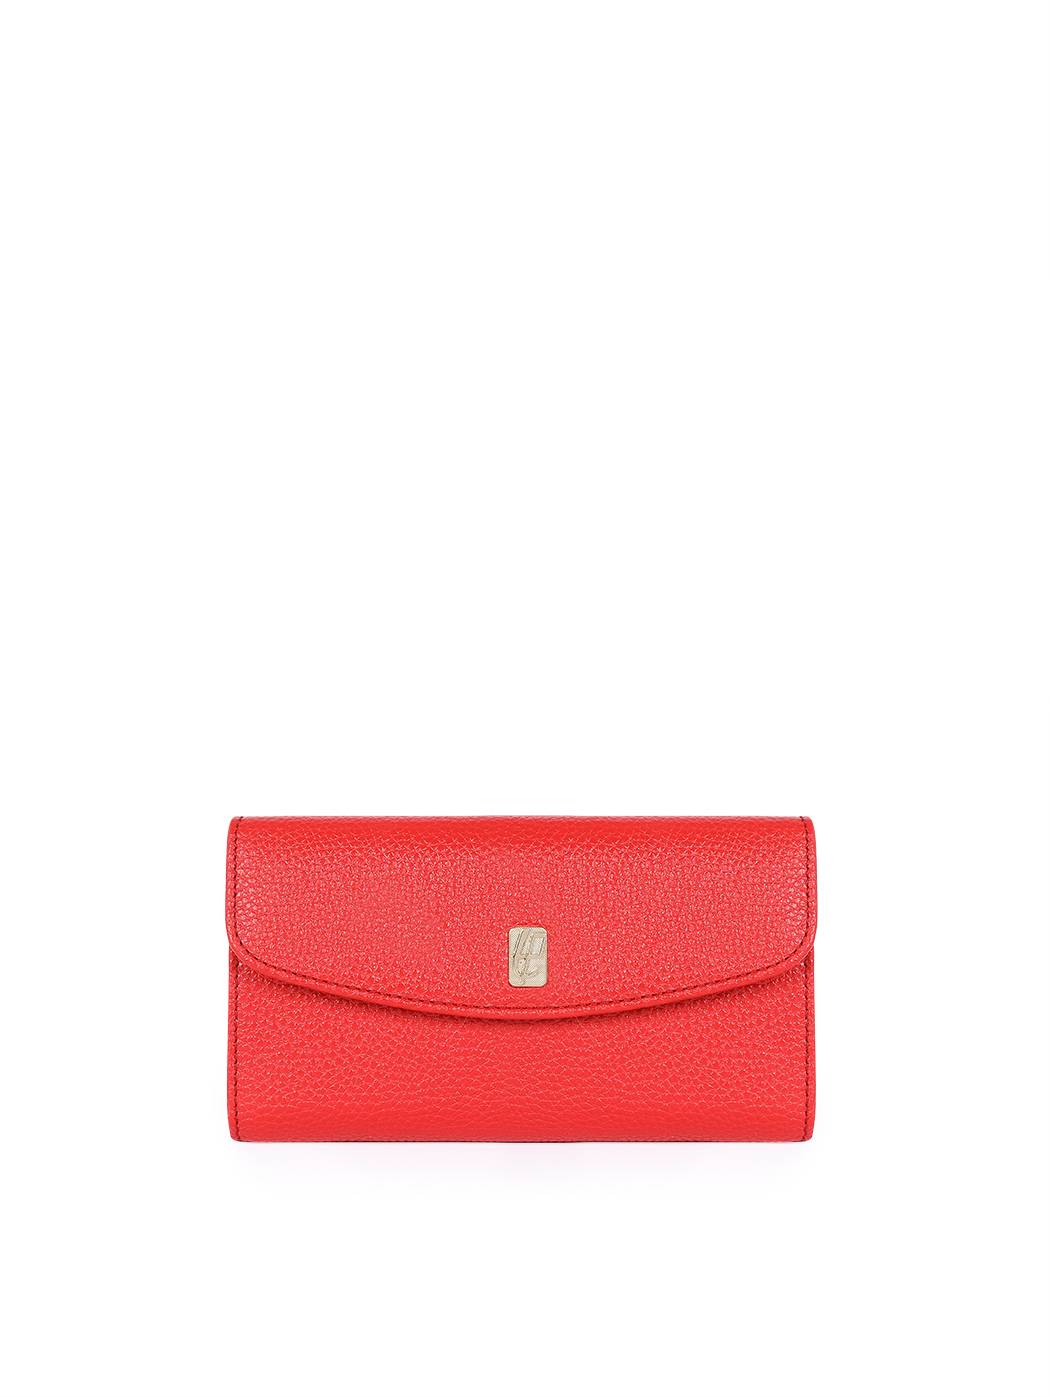 Long red leather wallet